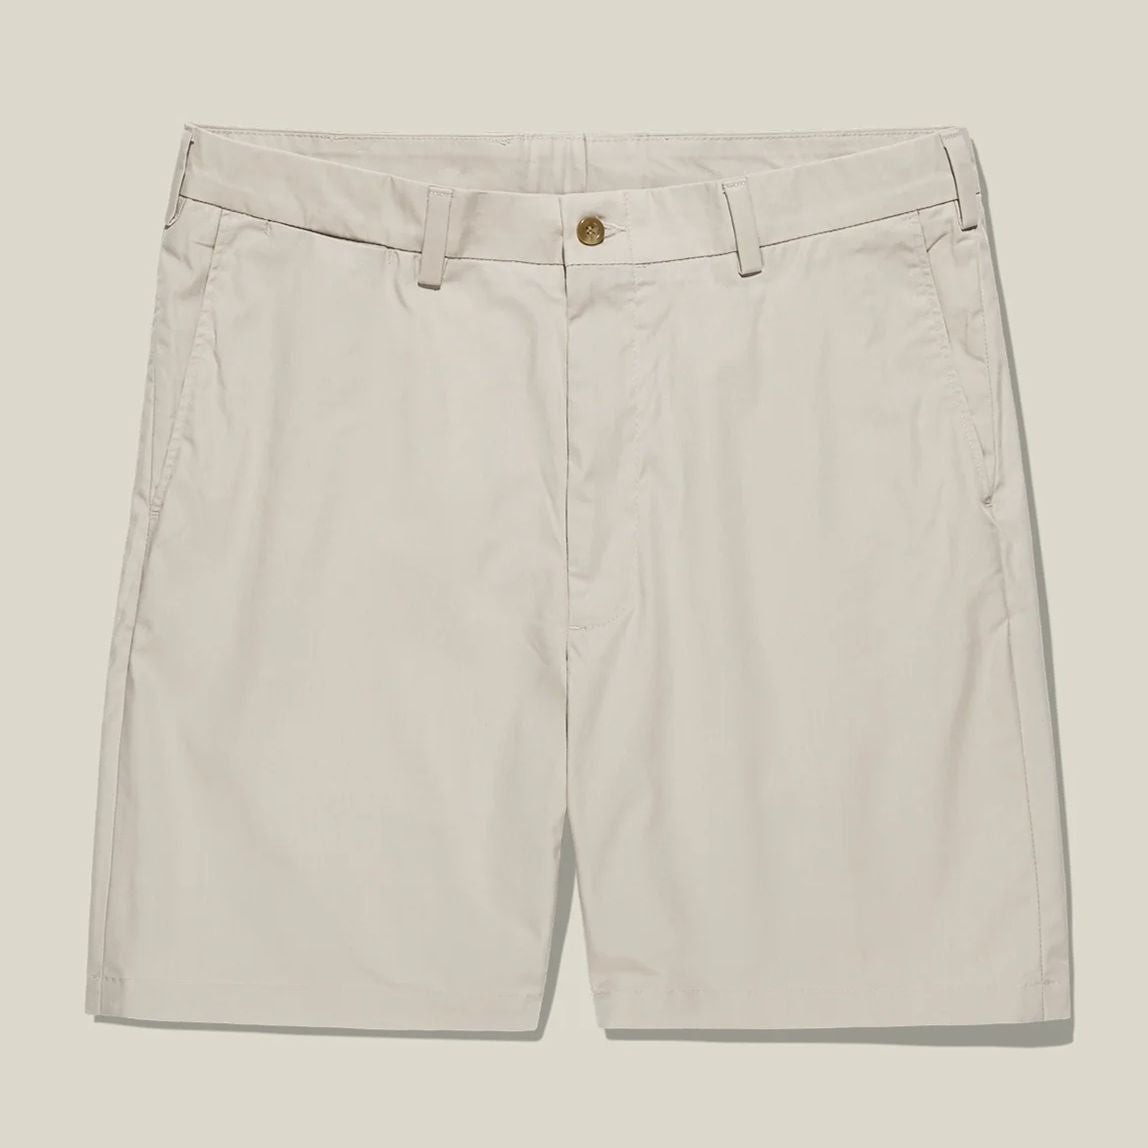 M3 Straight Fit Travel Twill Shorts in Cement by Bills Khakis